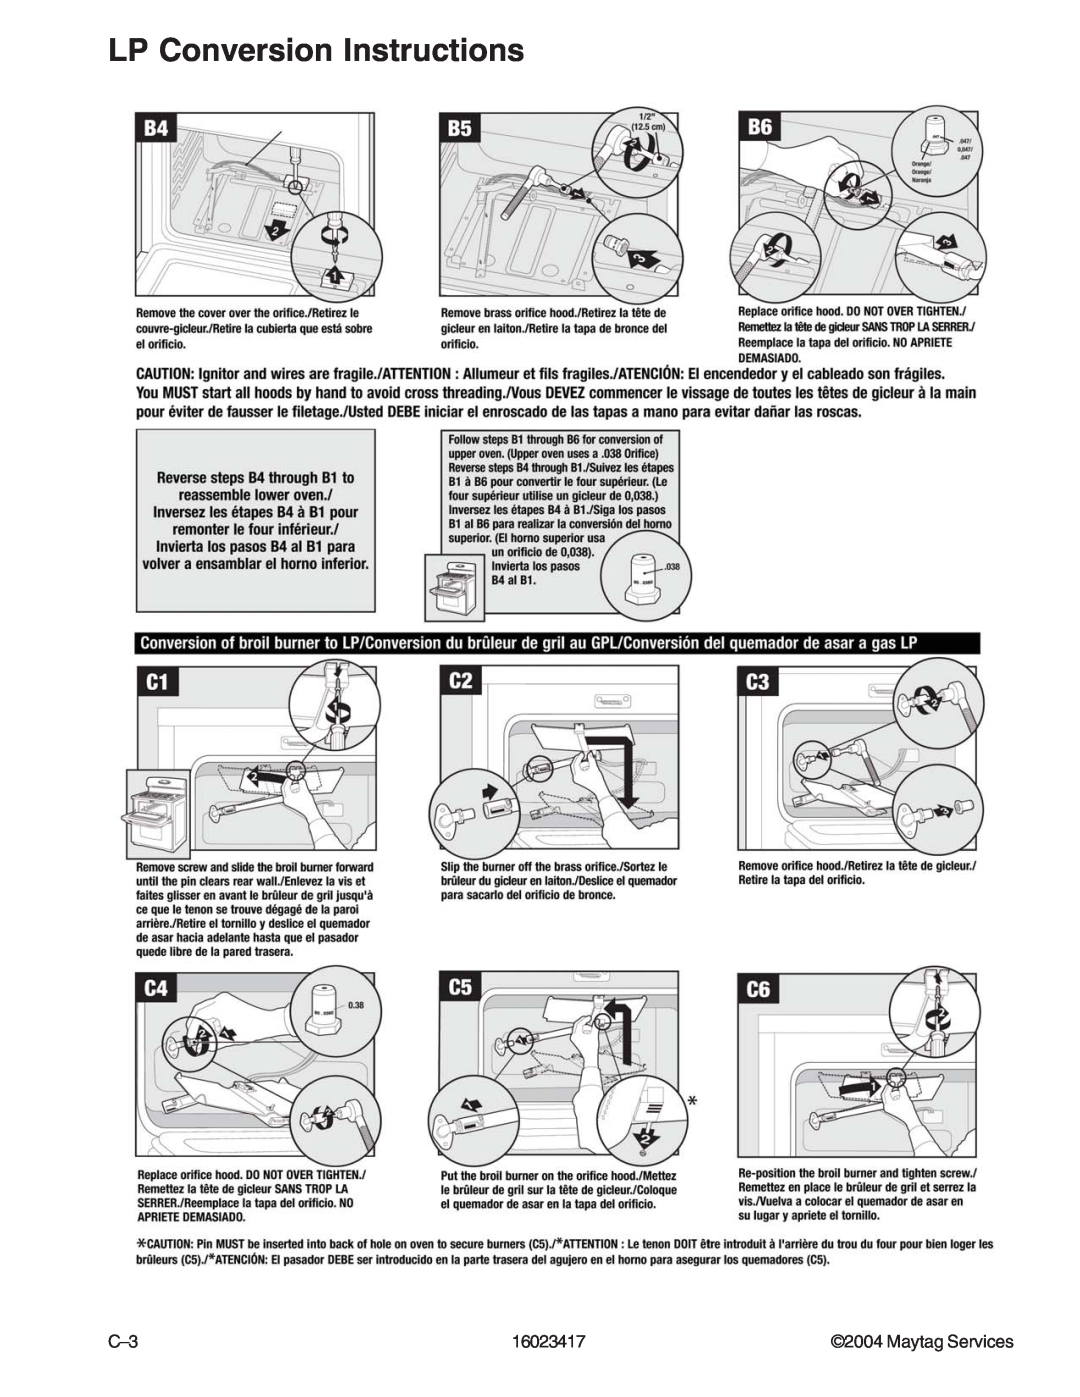 Jenn-Air JDR8895ACS/W, JDR8895AAB/S/W manual LP Conversion Instructions, 16023417, Maytag Services 